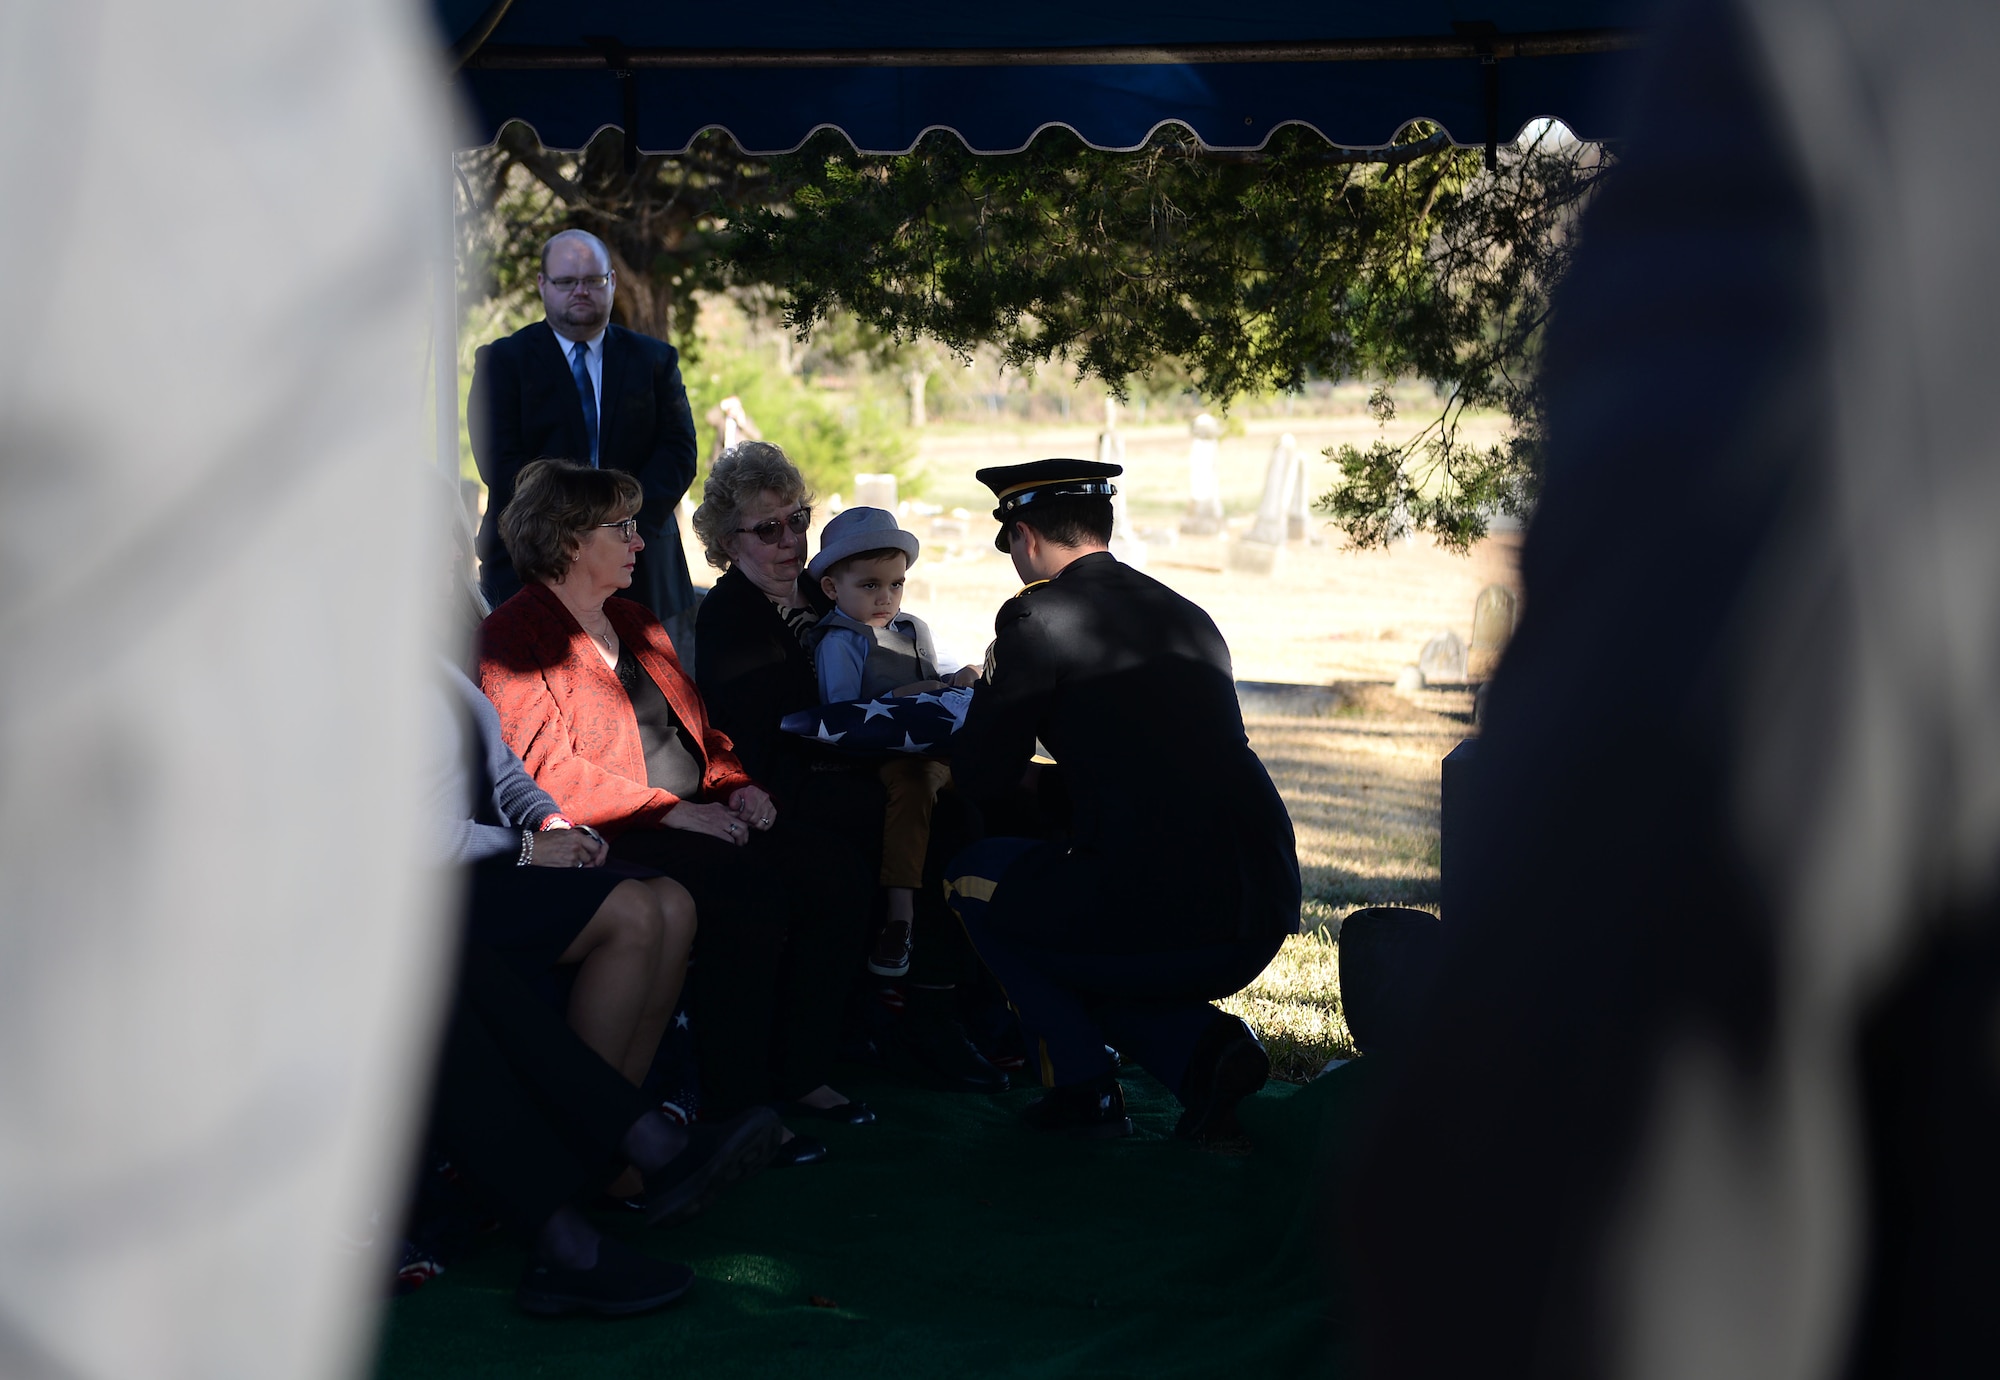 An Army honor guardsman gives Sandra Inman, niece of former Army Air Corps Capt. Charles T. Hull -- a decorated World War II bomber pilot – a folded American flag during a funeral and burial service with full military honors Dec. 4, 2019, at Duck Hill Cemetery in Winona, Miss. Hull began his service in the Army Air Corps in November 1942, where he attended the Columbus Army Flying School on what is now Columbus Air Force Base. (U.S. Air Force photo by Airman Hannah 1st Class Bean)